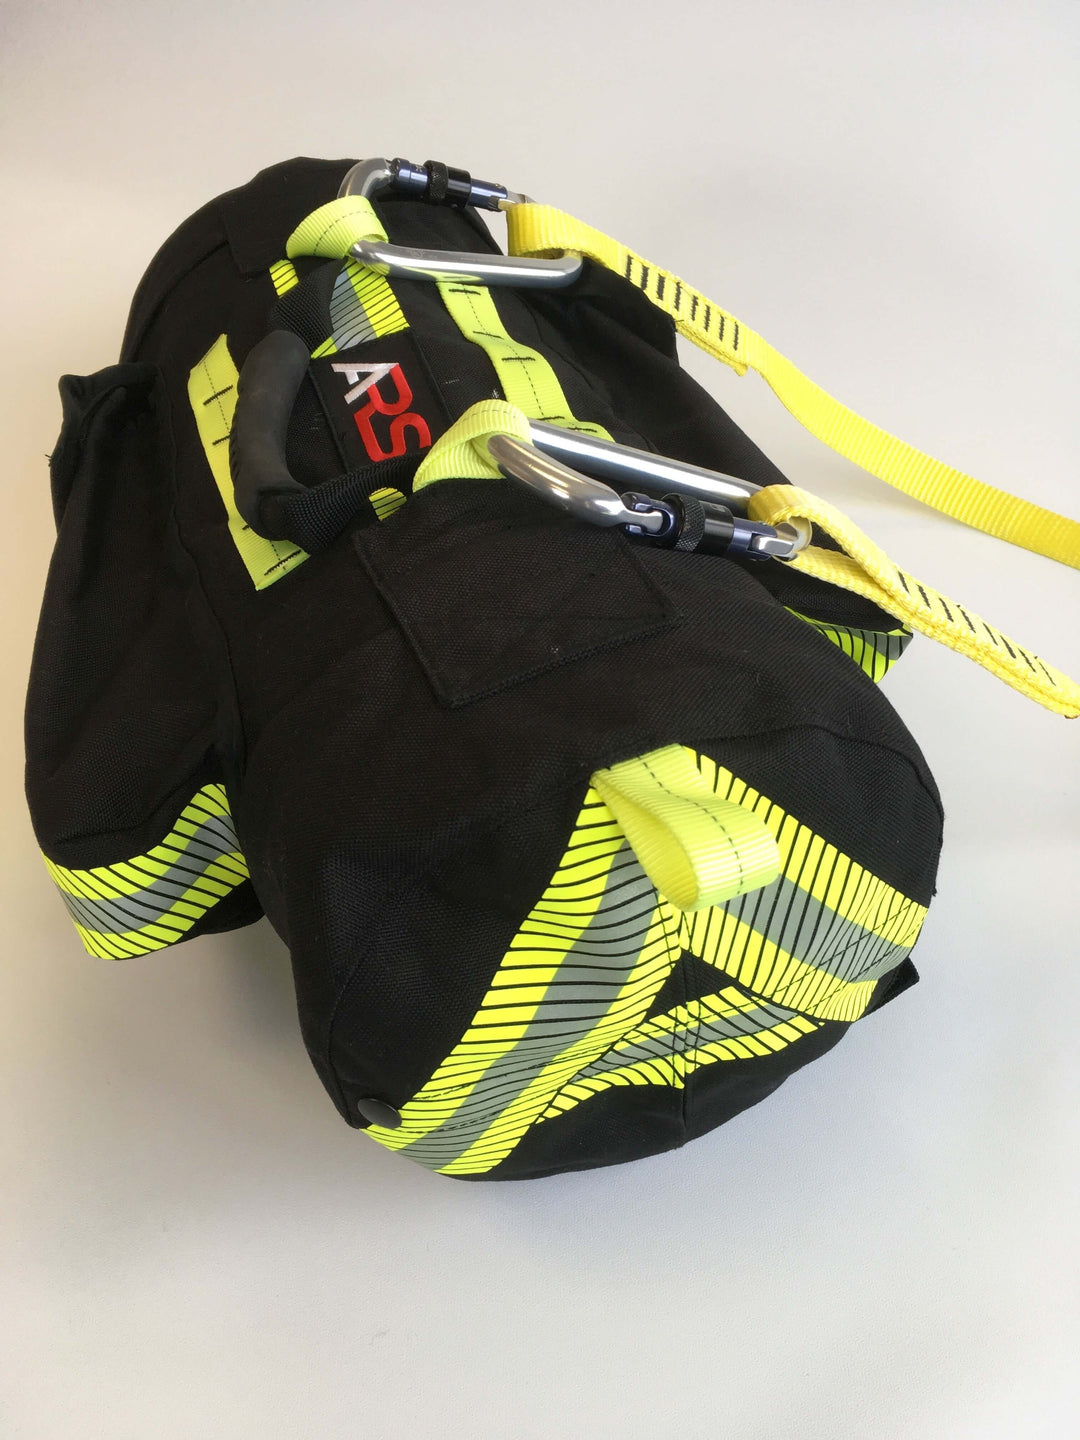 Side view of Fireground Special Operations Rope Bag